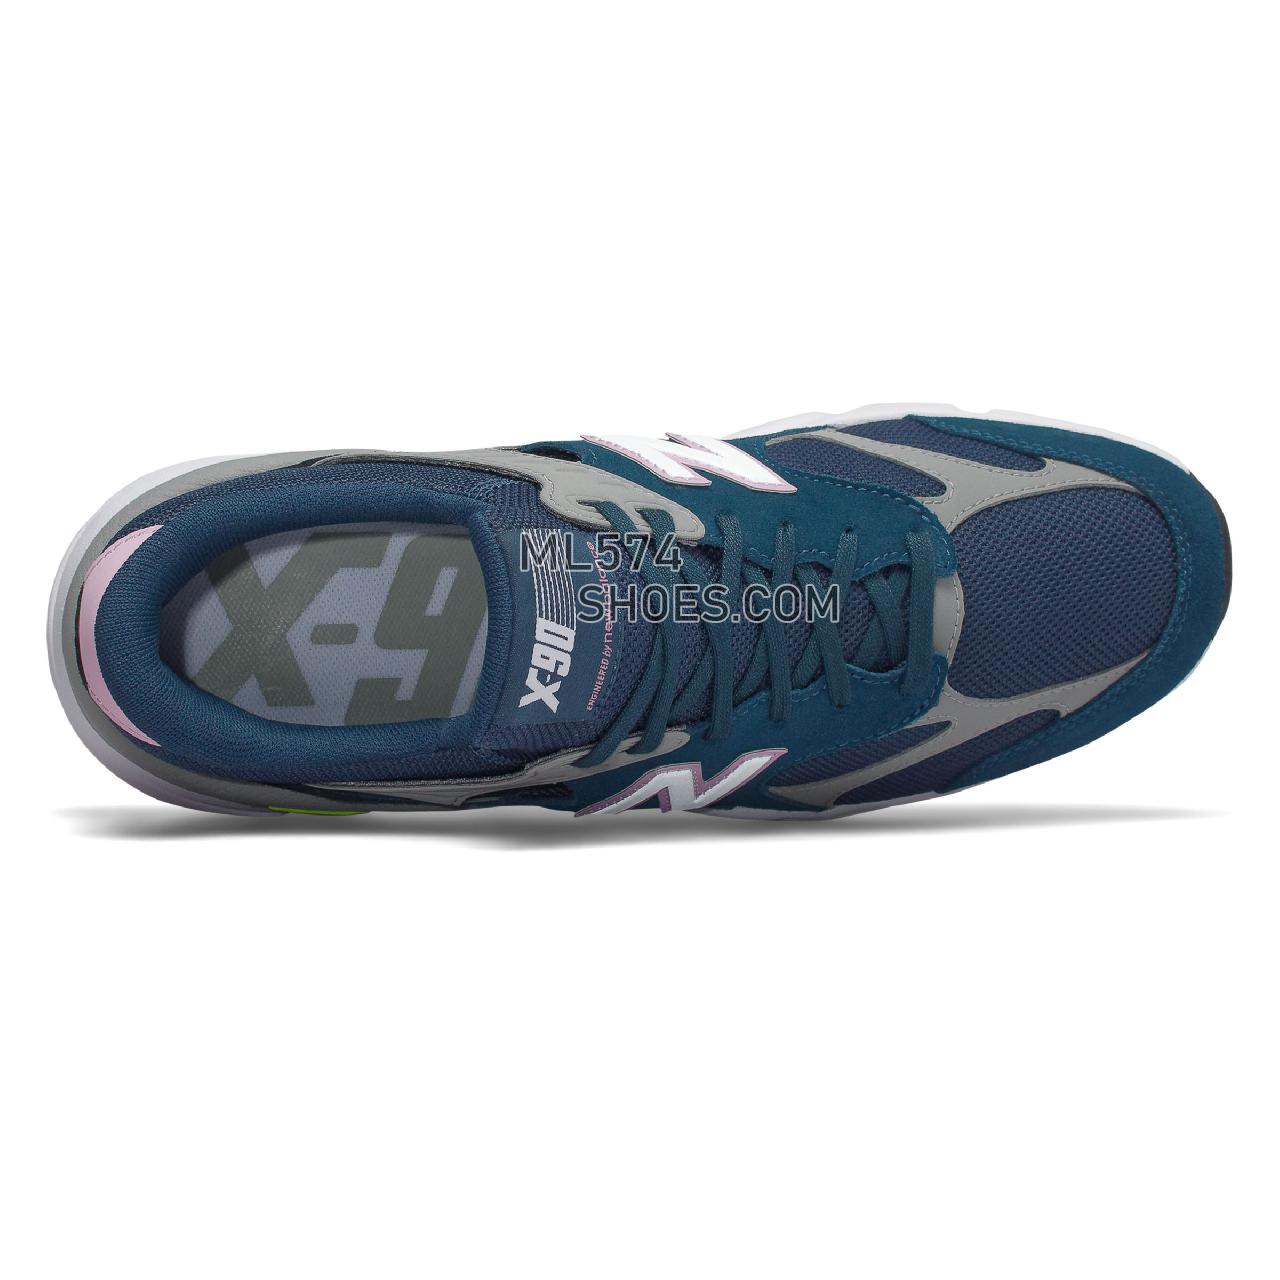 New Balance X-90 - Men's Sport Style Sneakers - North Sea with Team Away Grey - MSX90RCD